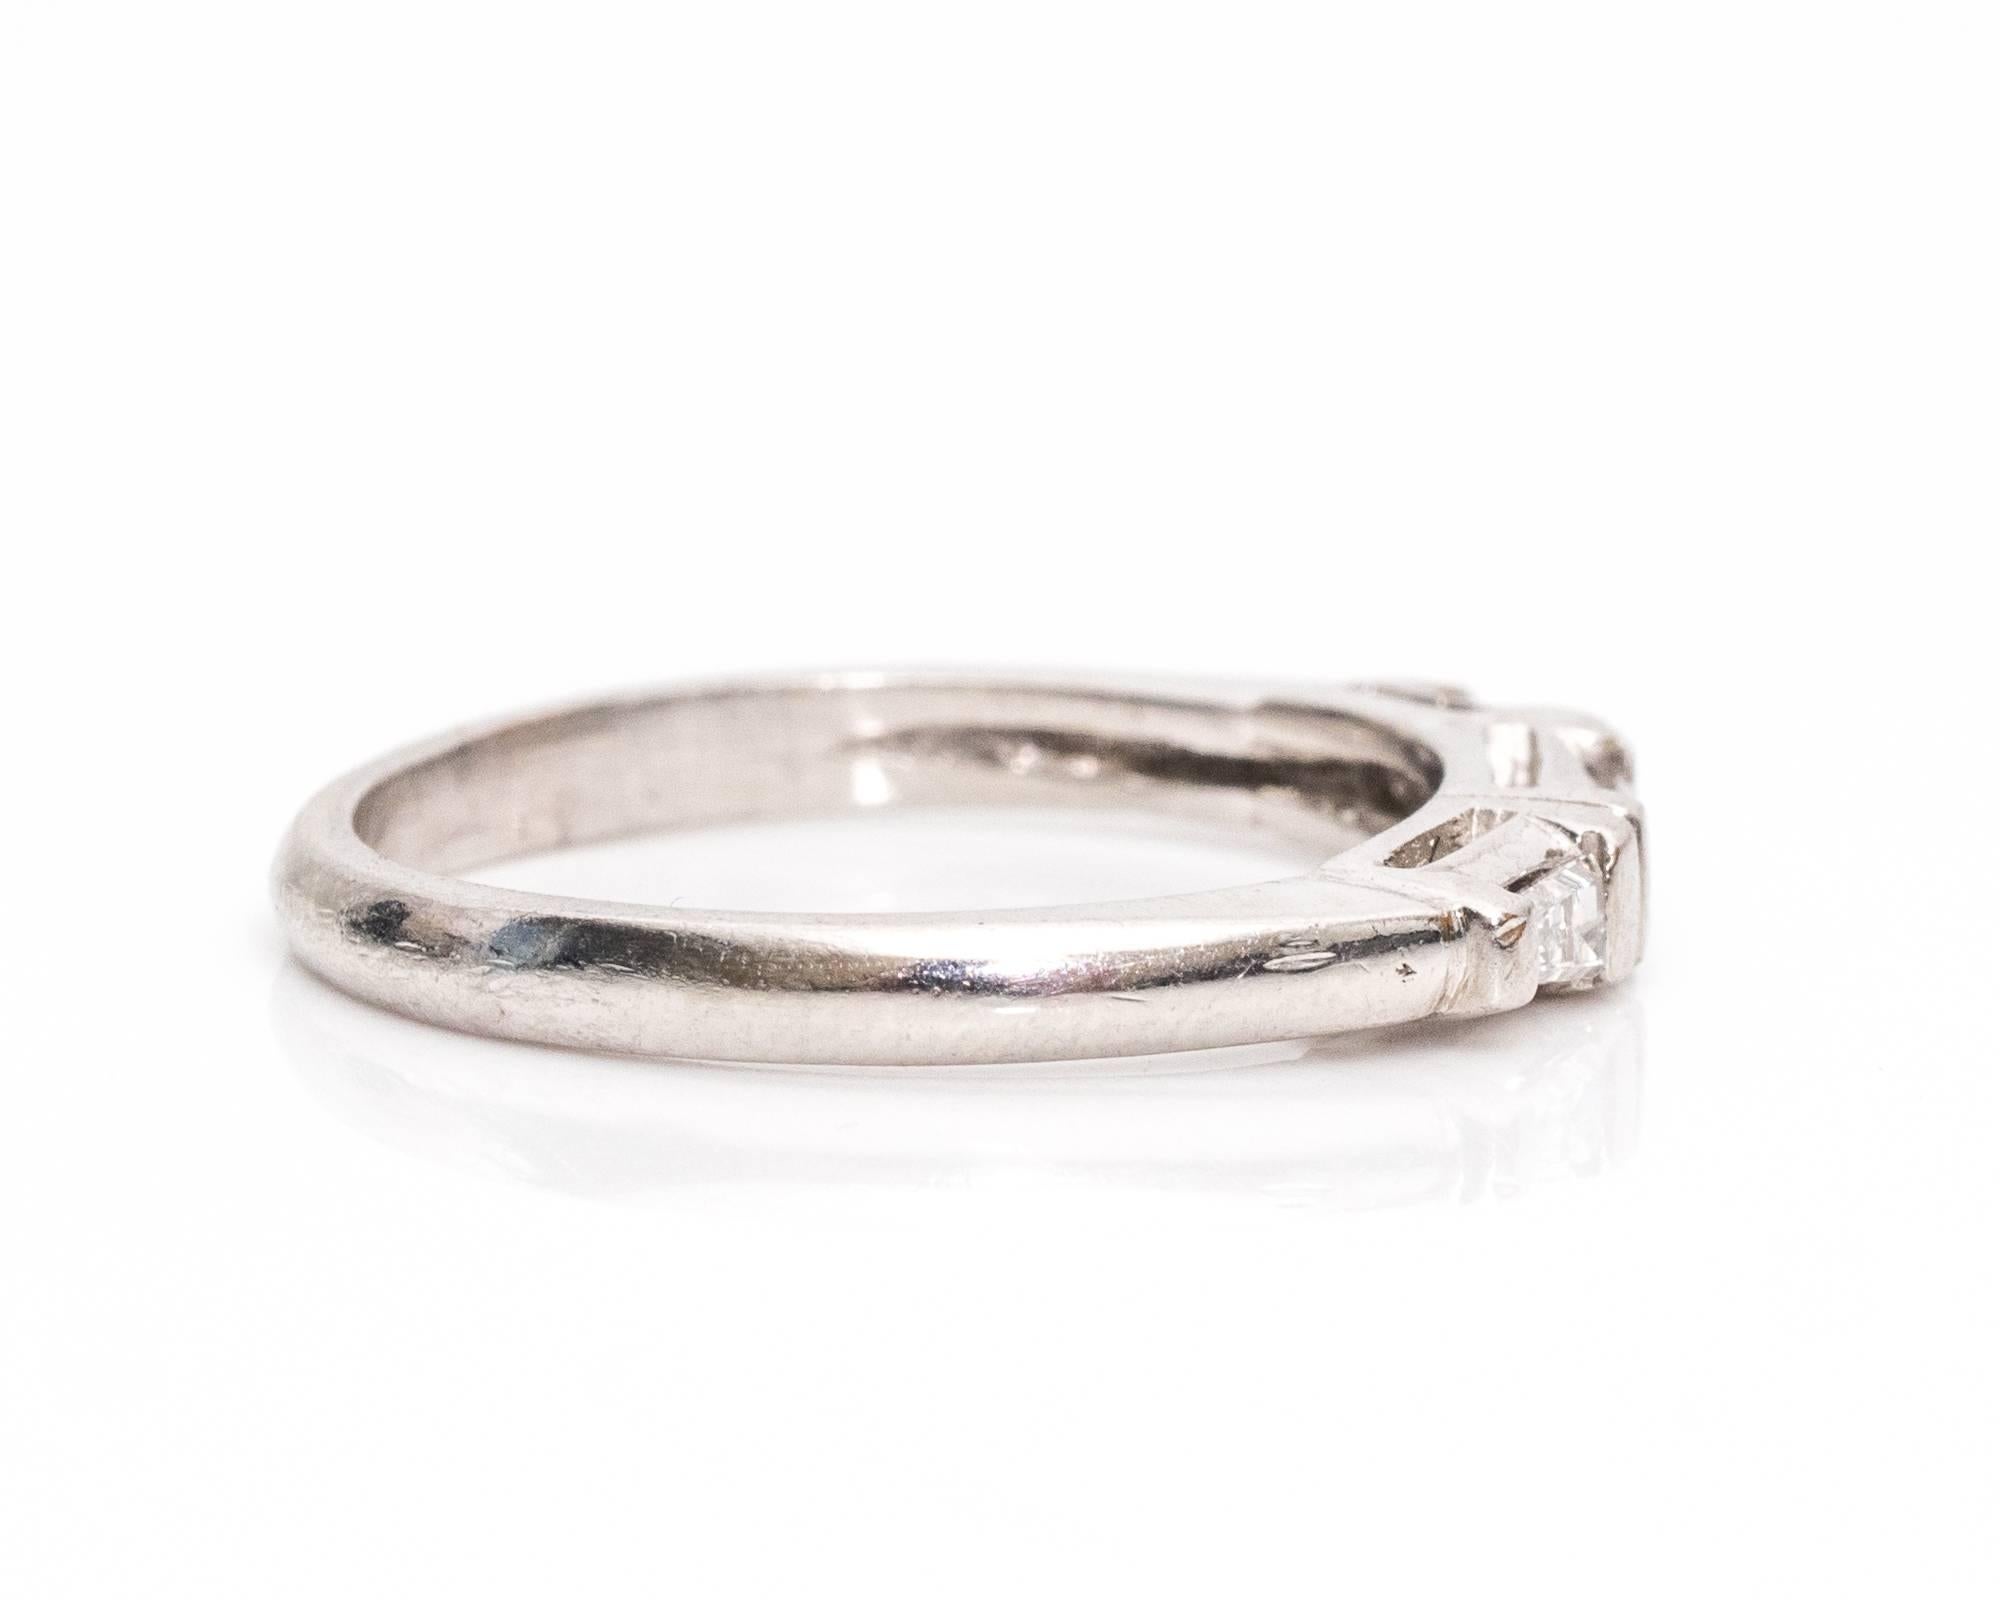 Simple Platinum 1940s Wedding Band with a Modern Look
Features Three Lovely Baguette Diamonds. The center diamond has a traditional baguette shape and the two on the shoulder are tapered in a triangular fashion. The stones are set in half bezel sets